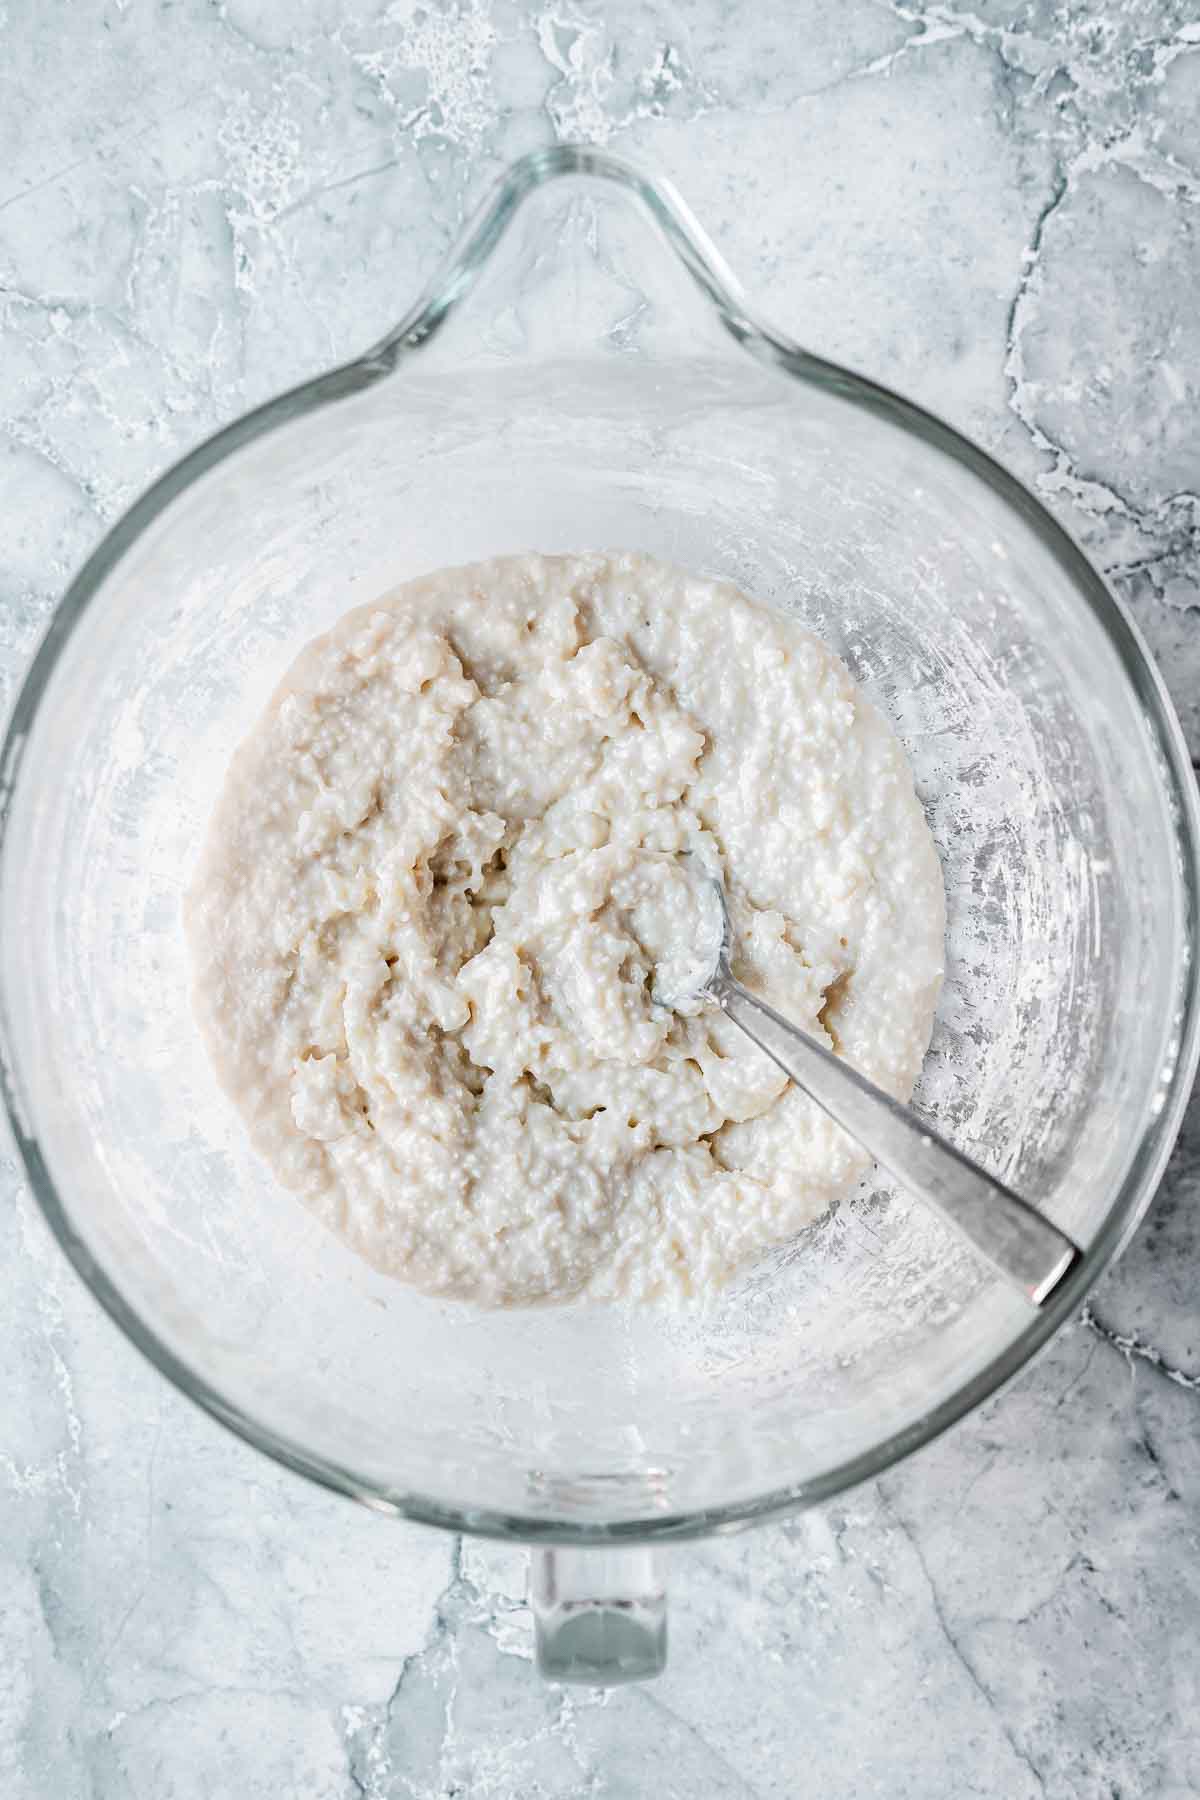 Coconut ice mixture in a mixing bowl.